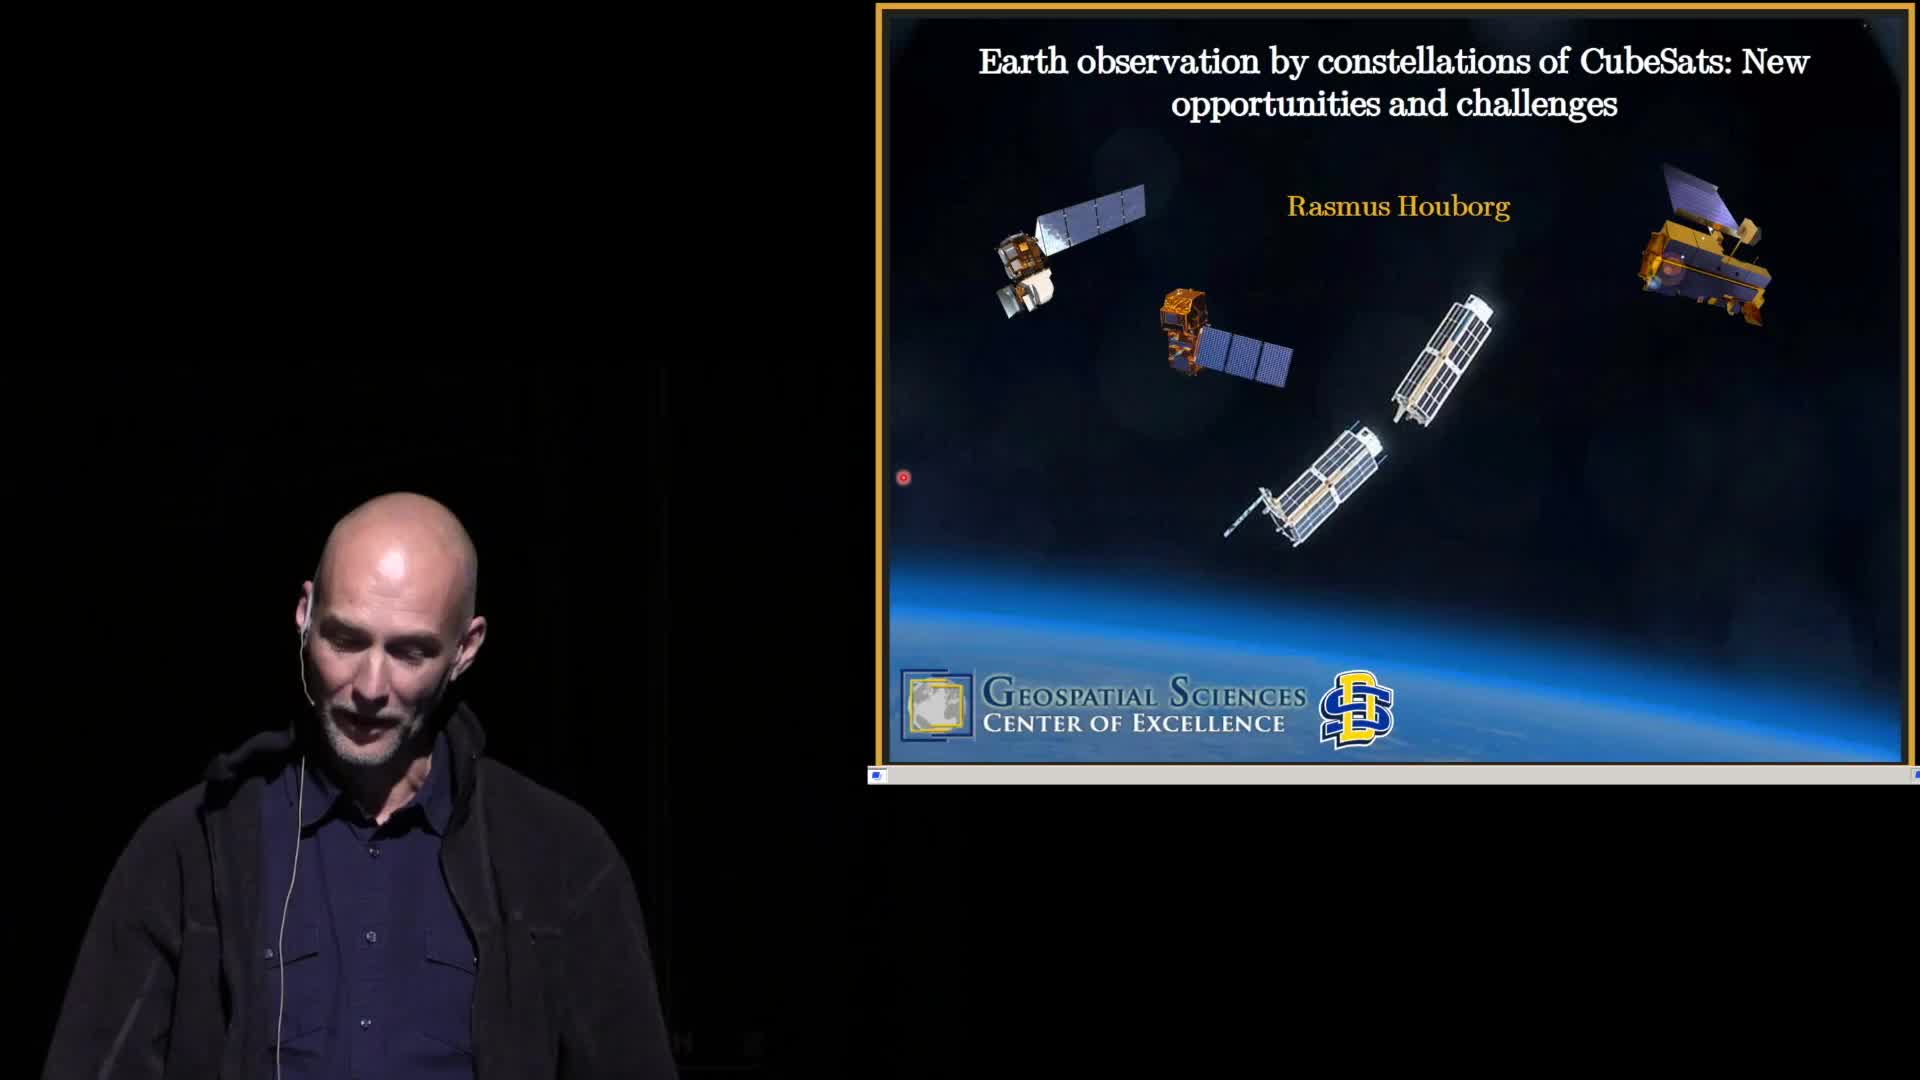 Earth observation by constellations of CubeSats: New opportunities and challenges